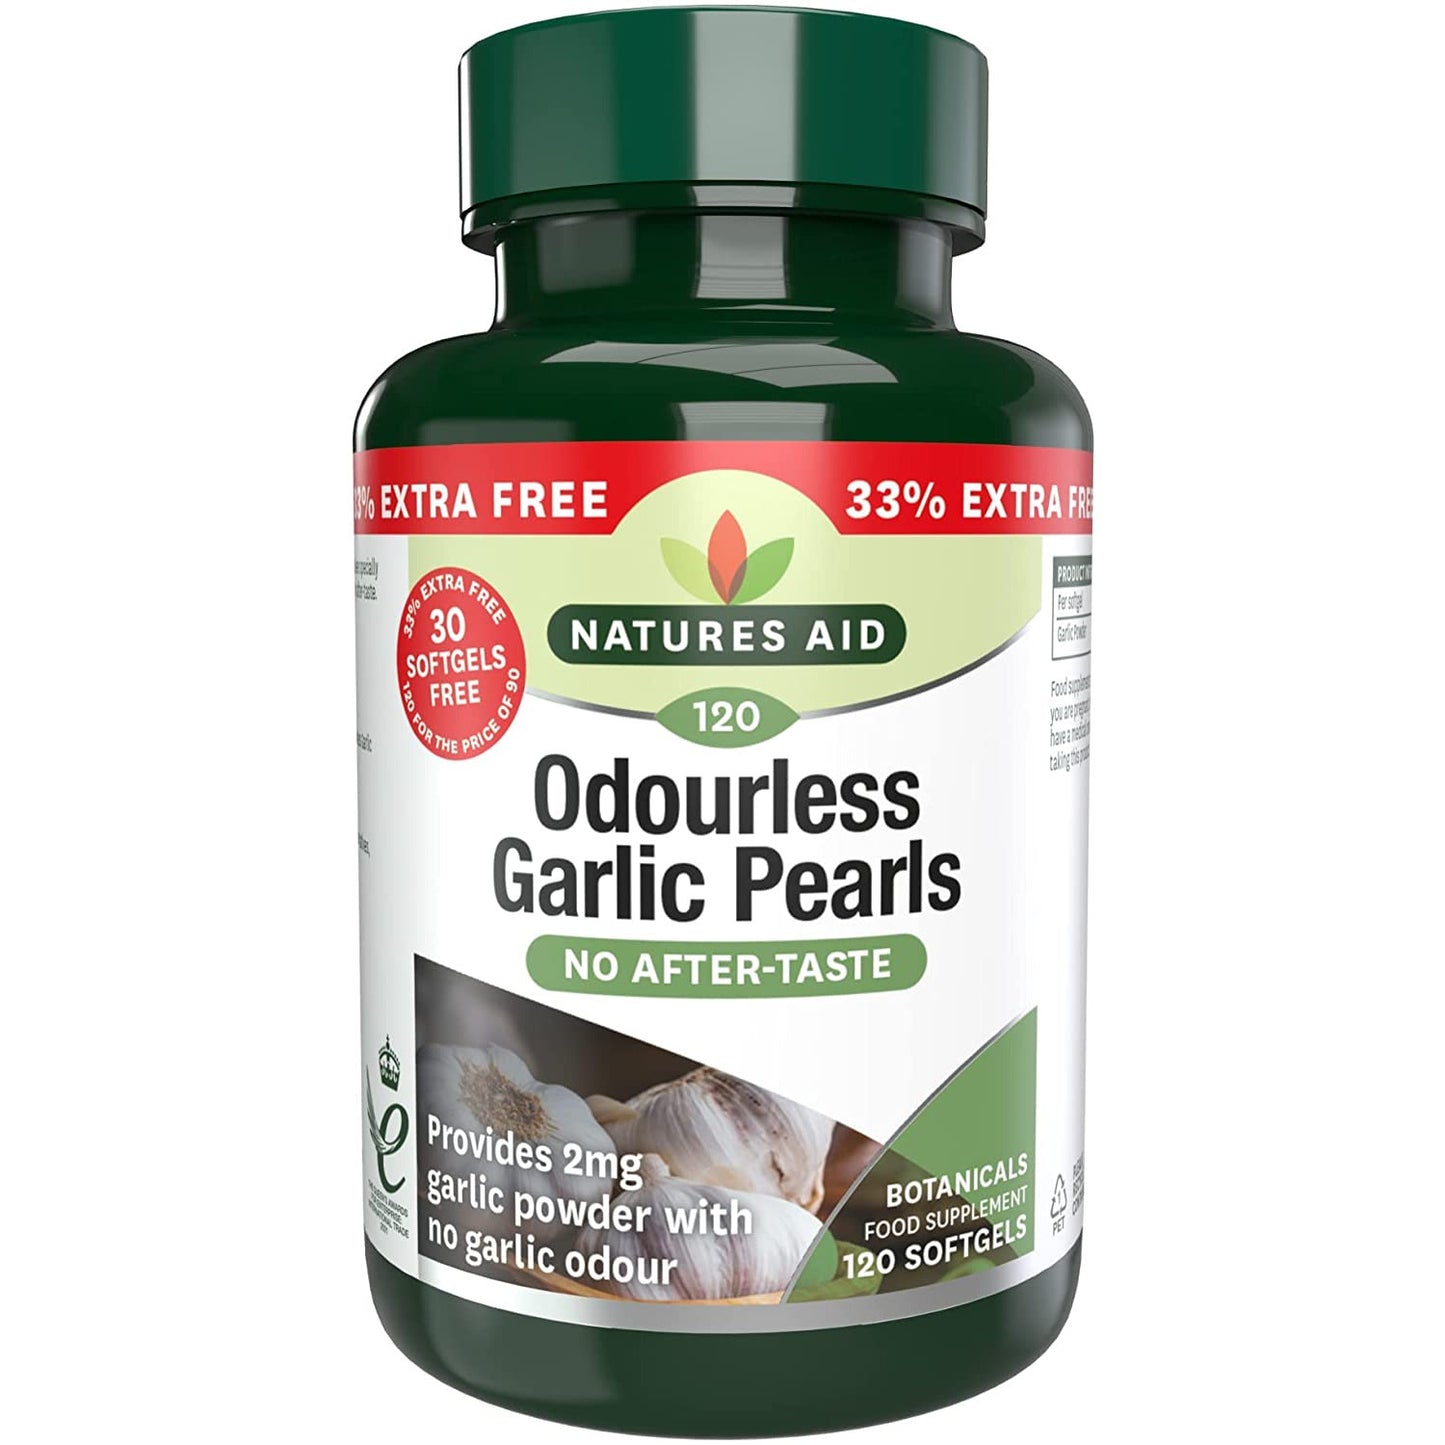 Natures Aid Odourless Garlic Pearls